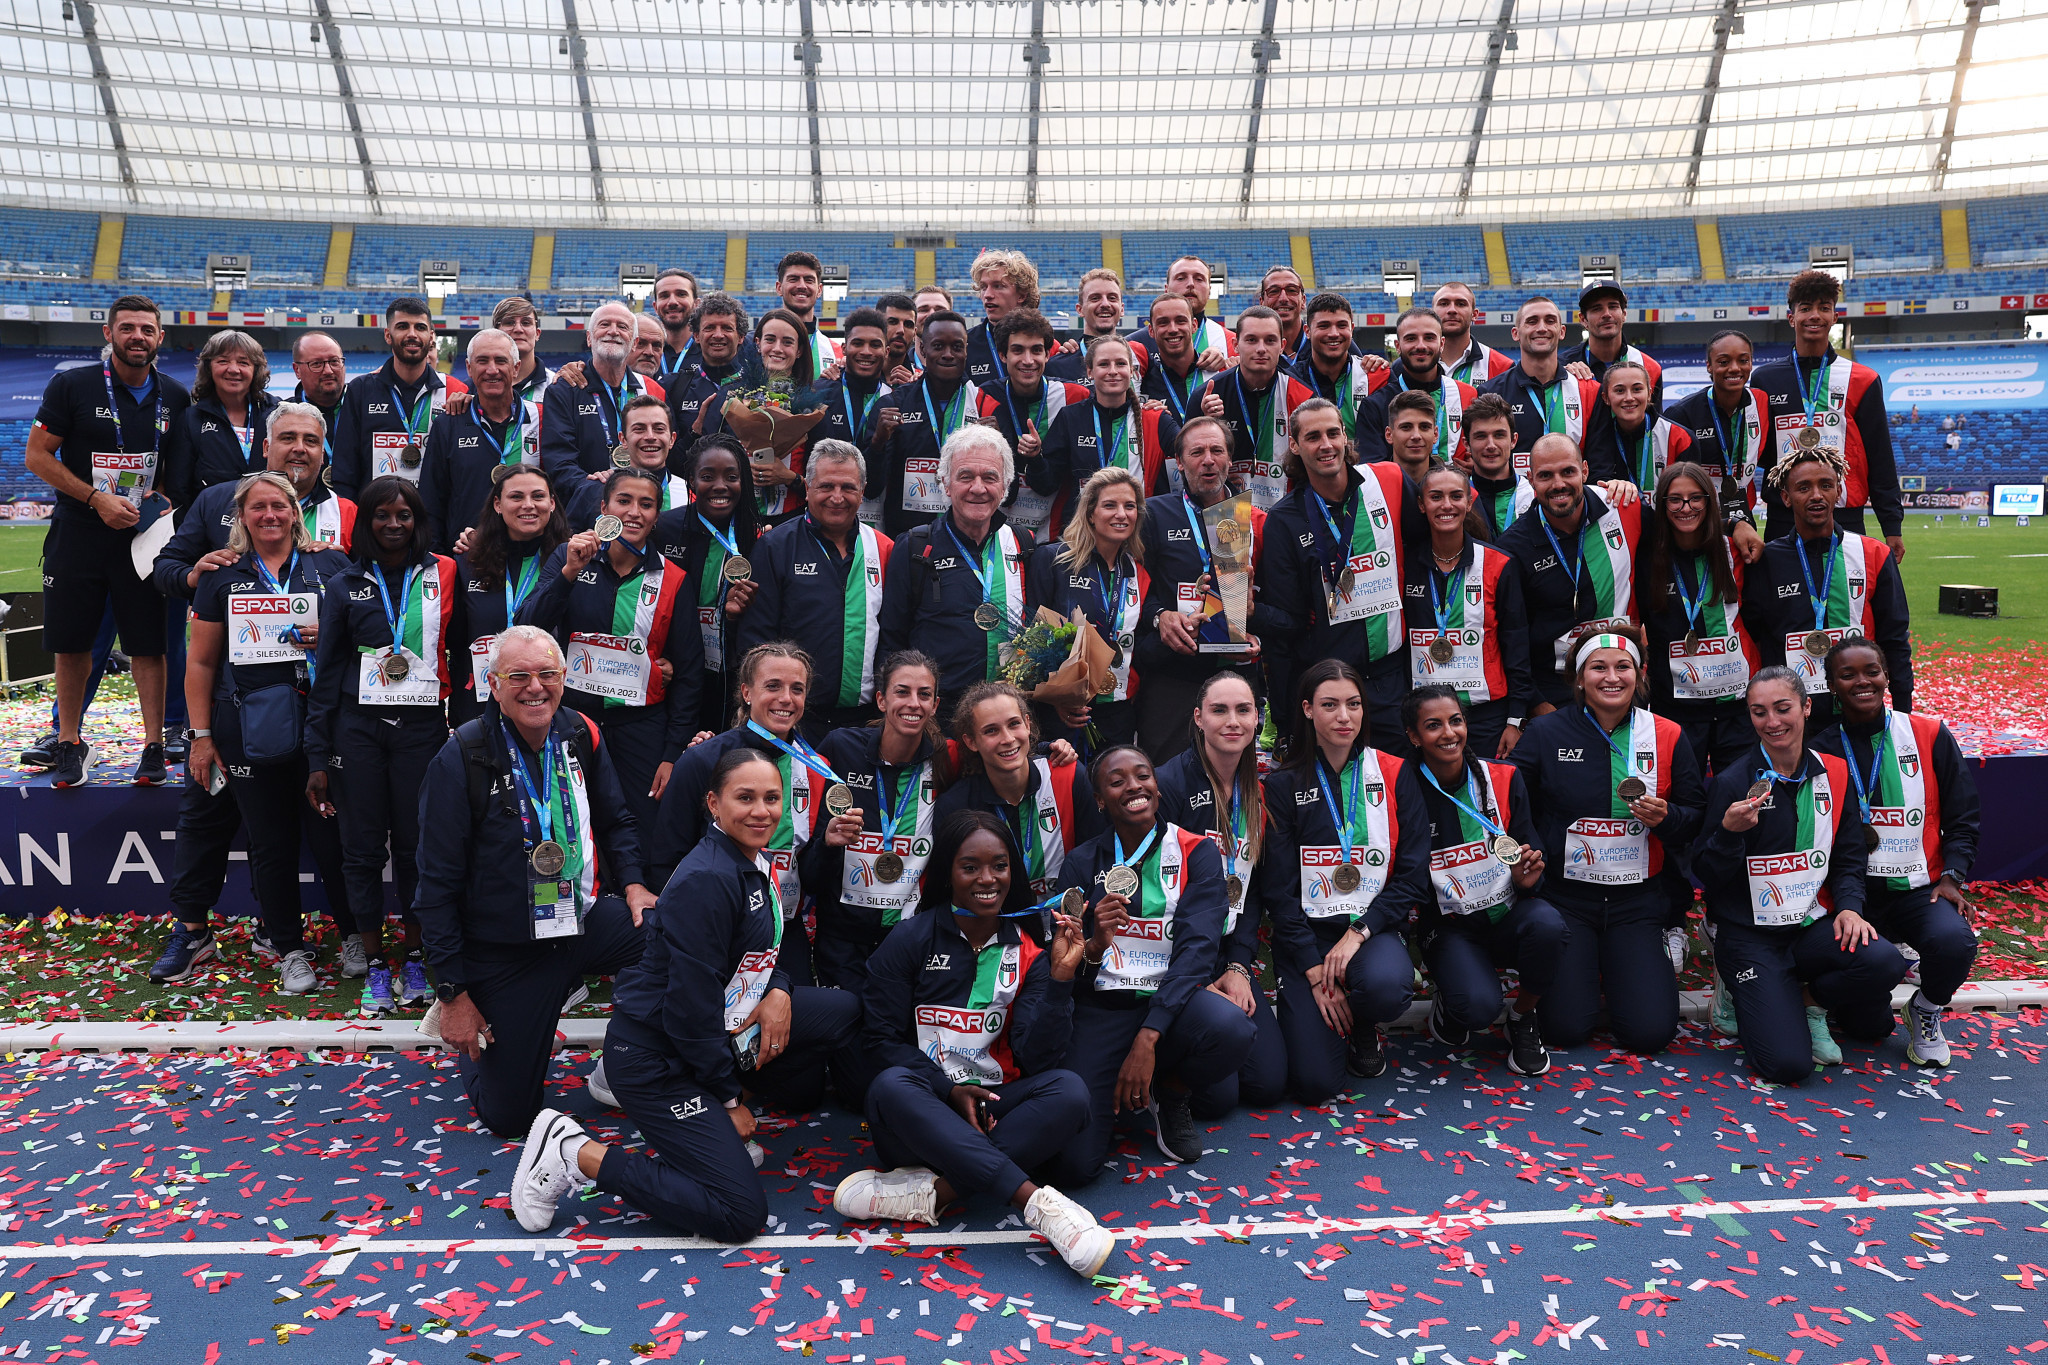 Italy won the European Athletics Team Championships and a European Games team gold ©Getty Images